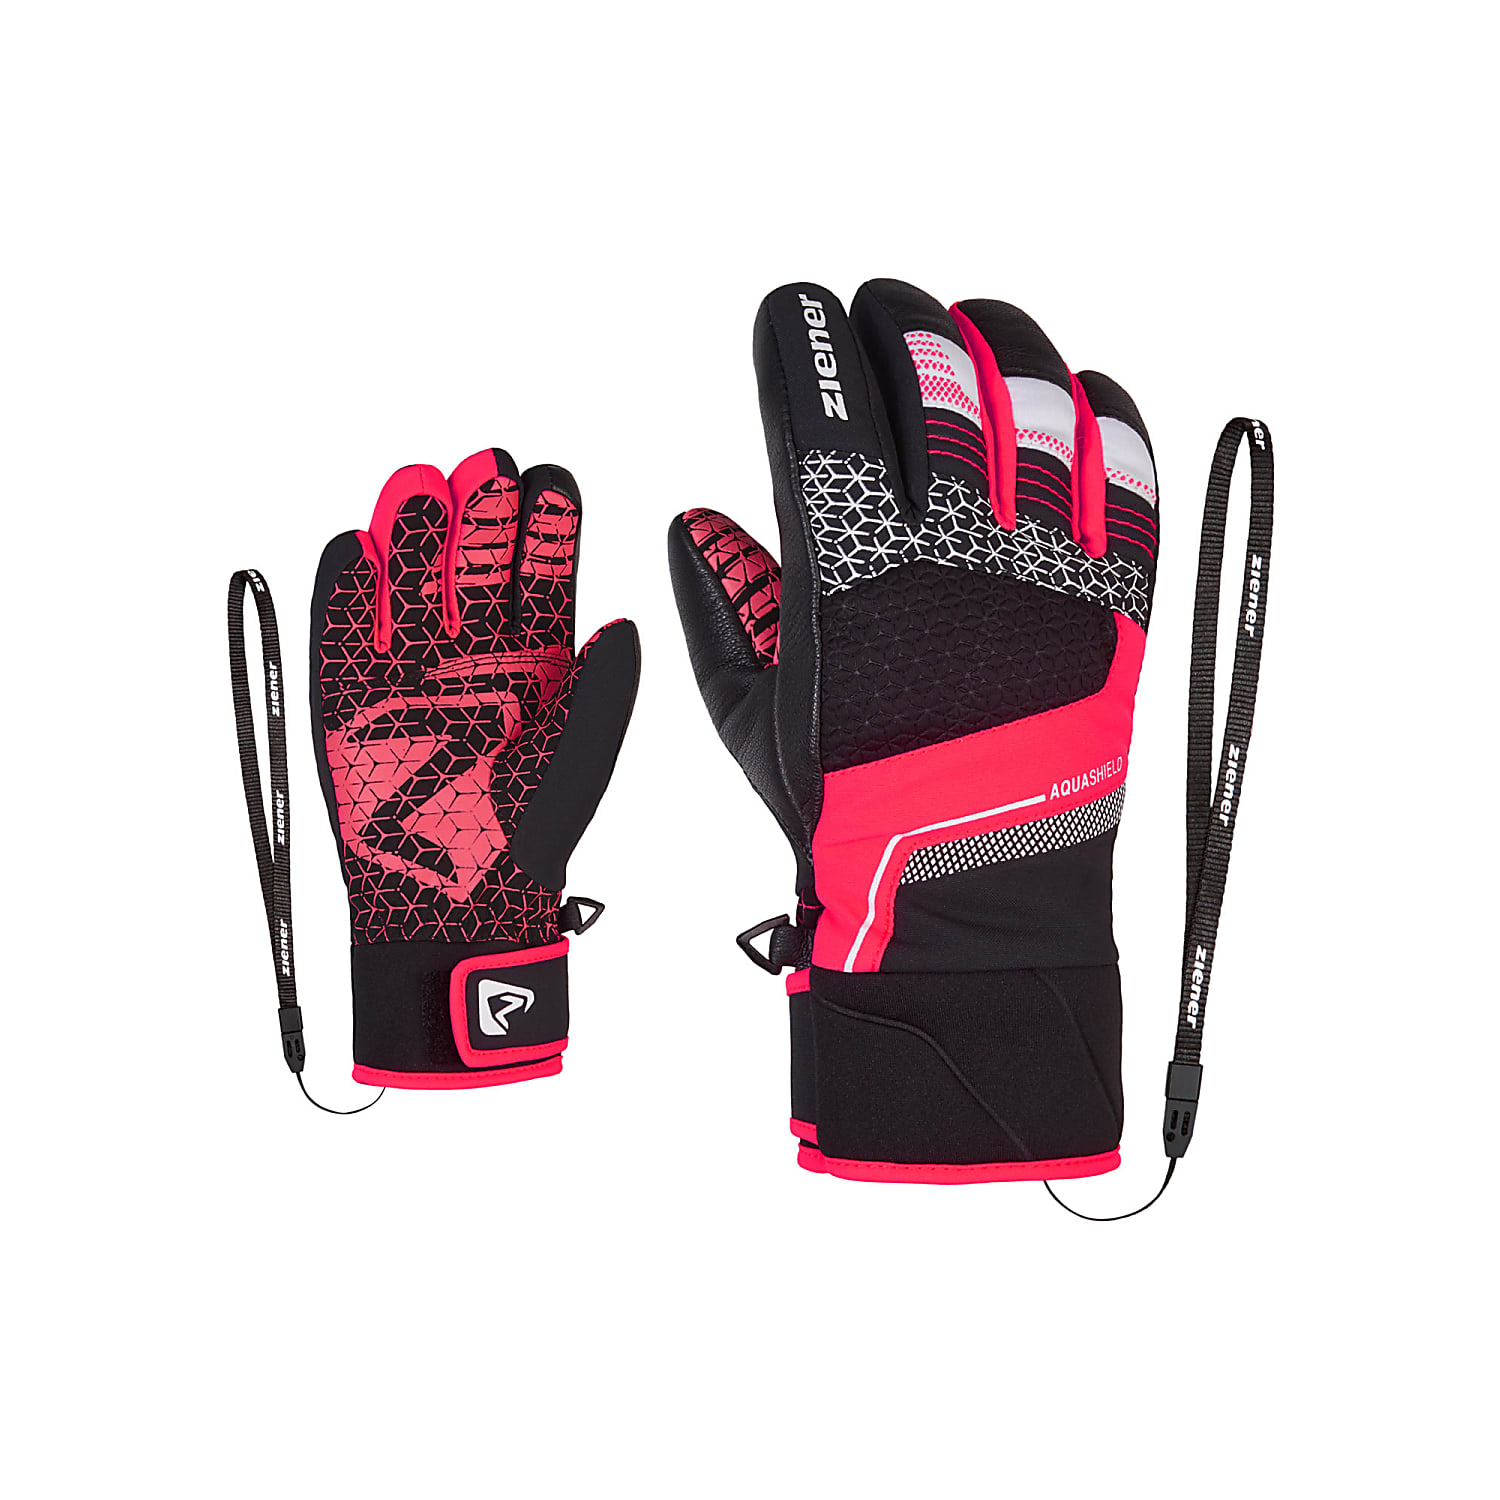 Ziener JUNIOR LONZALO AS PR - - and Black Fast Neon GLOVE, cheap Pink shipping